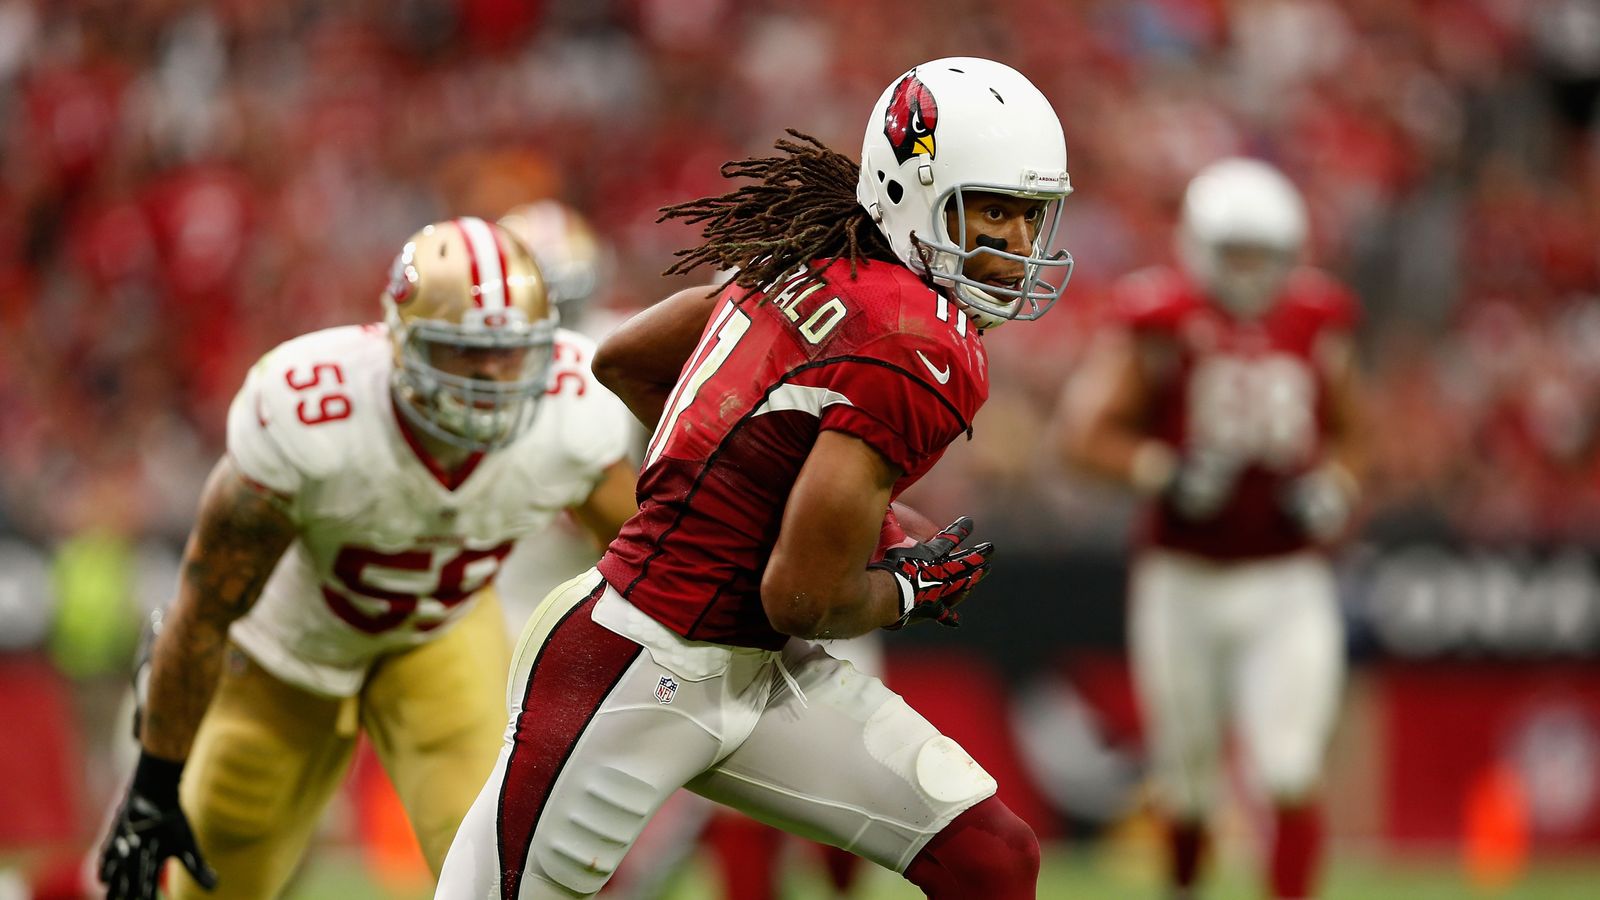 Arizona Cardinals drafted Larry Fitzgerald 16 years ago